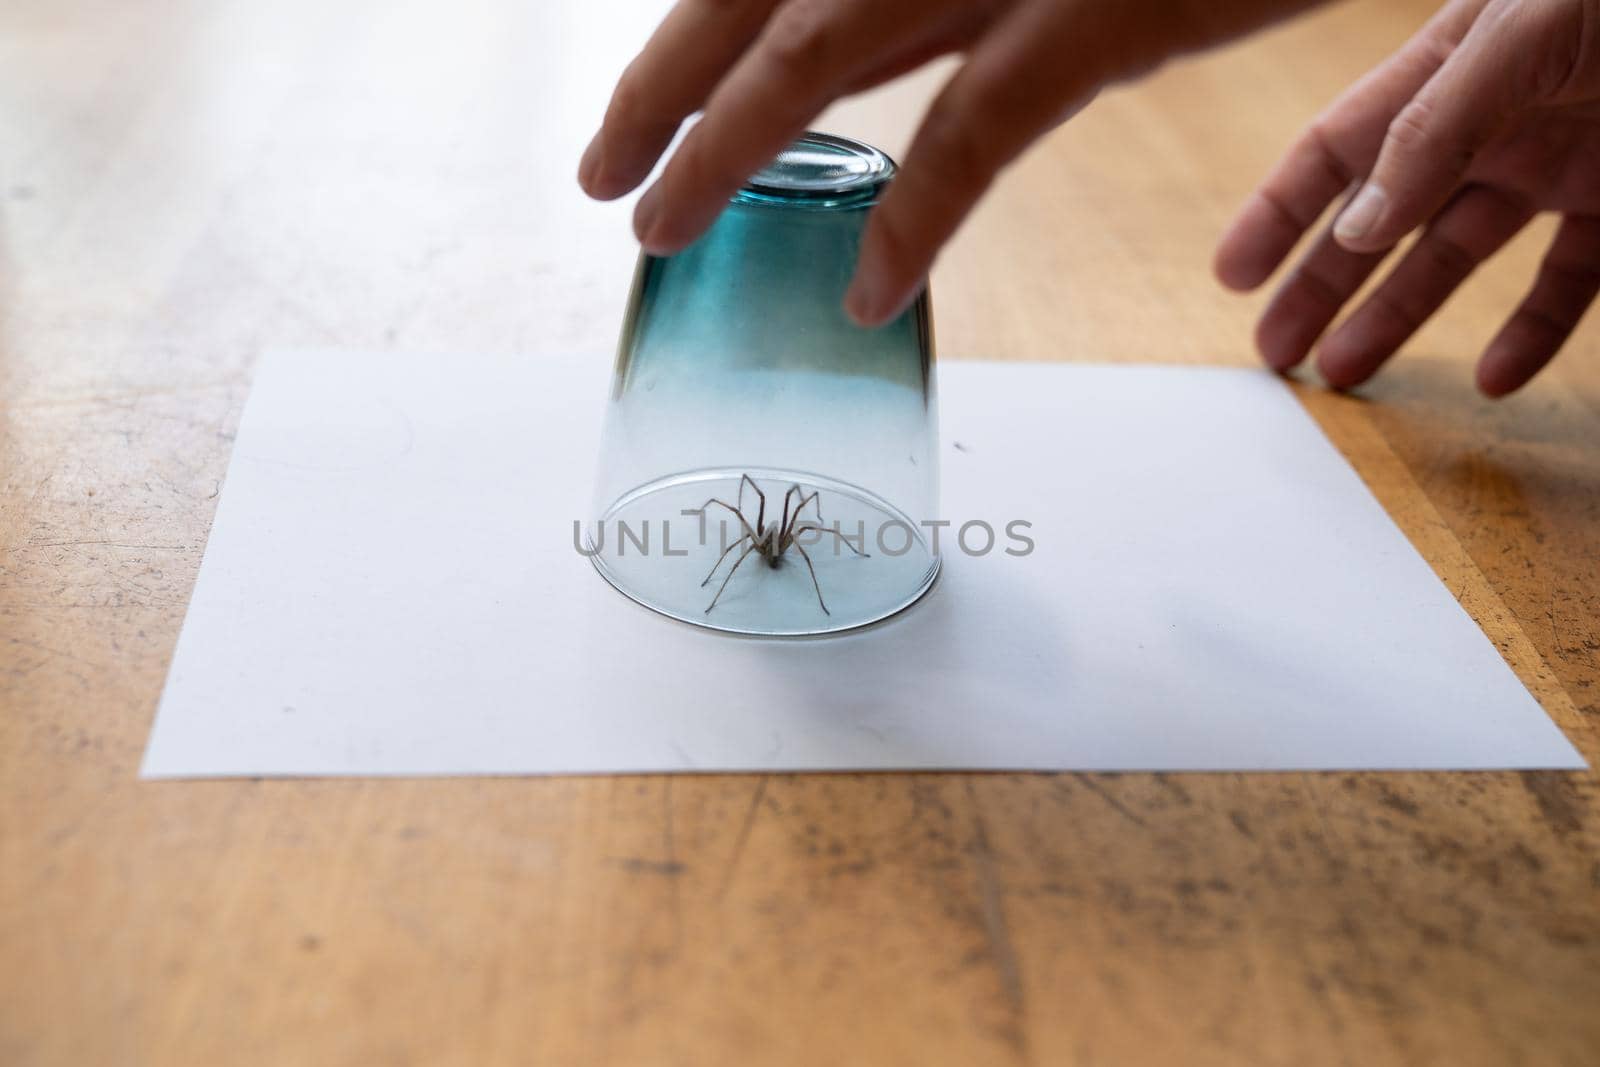 Caught big dark common house spider under a drinking glass on a smooth wooden floor seen from ground level in a living room in a residential home with two male hands by LeoniekvanderVliet